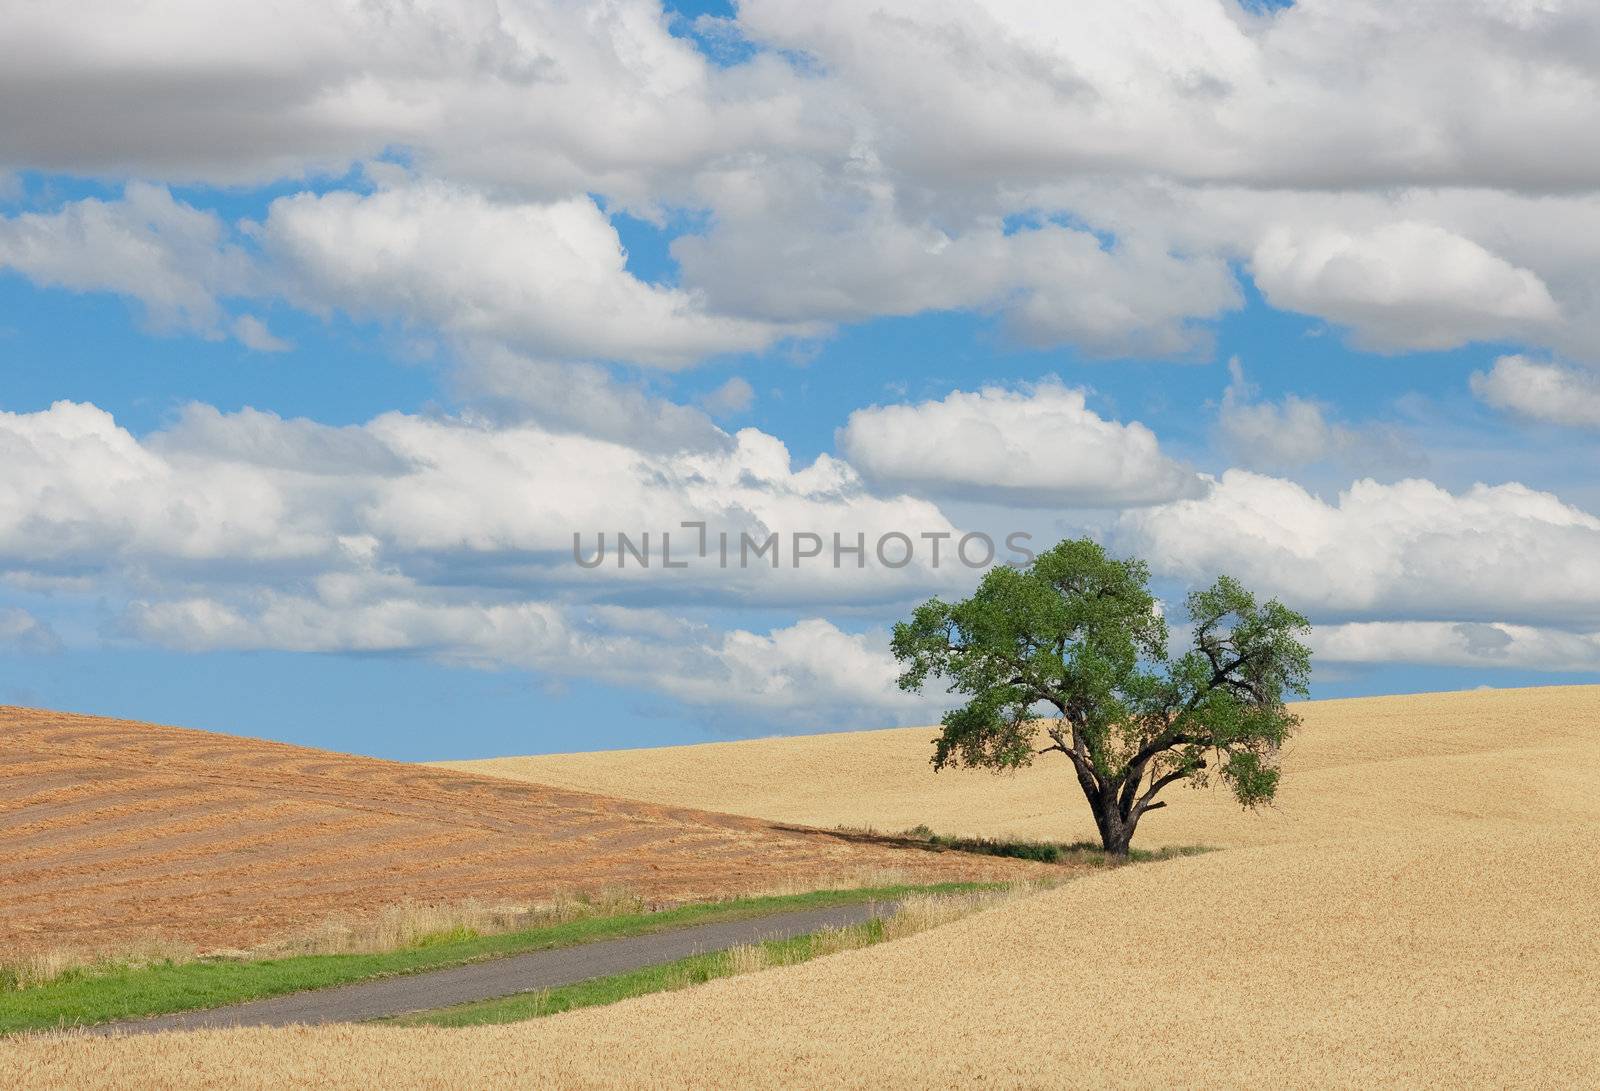 Willow tree, wheat field, rural road and clouds, Whitman County, Washington, USA by CharlesBolin